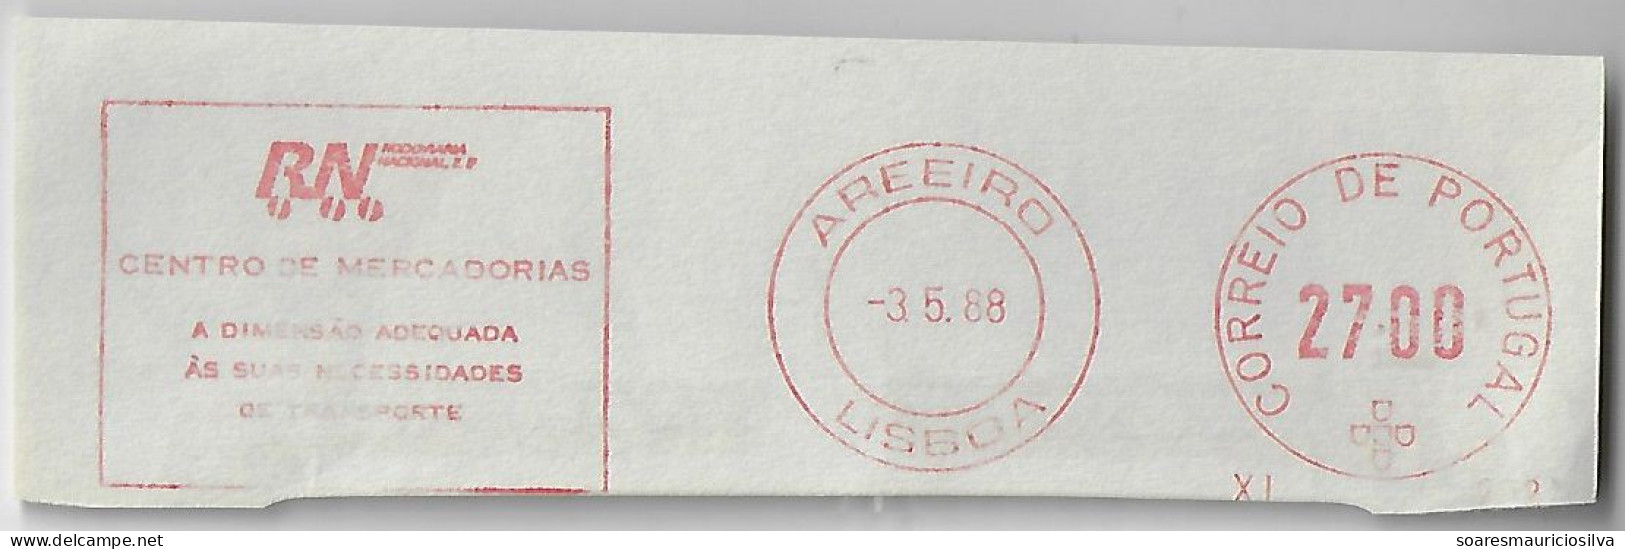 Portugal 1988 Cover Fragment Meter Stamp Frama Slogan National Road Co. From Lisbon Areeiro Agency Transport Bus - Bus